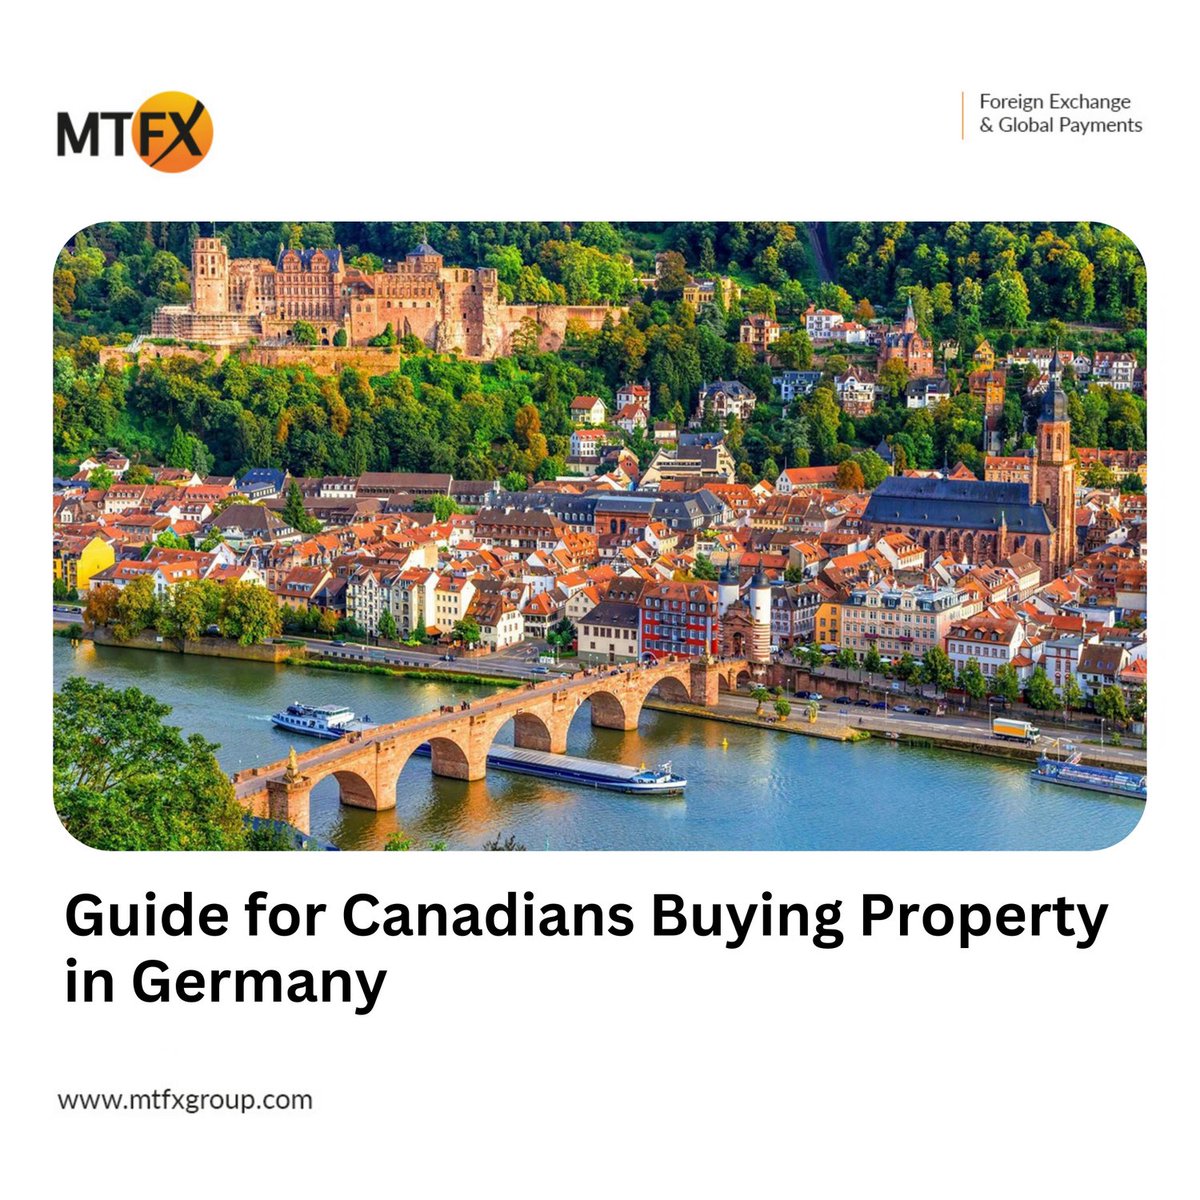 Can Canadians buy property in Germany? Yes, they can! Canadians can buy real estate hassle-free, thanks to easy processes and MTFX's support in managing international payments.

Read our guide: bit.ly/3w6uXMg

#MTFXSolutions #ForeignExchange #InternationalPayments